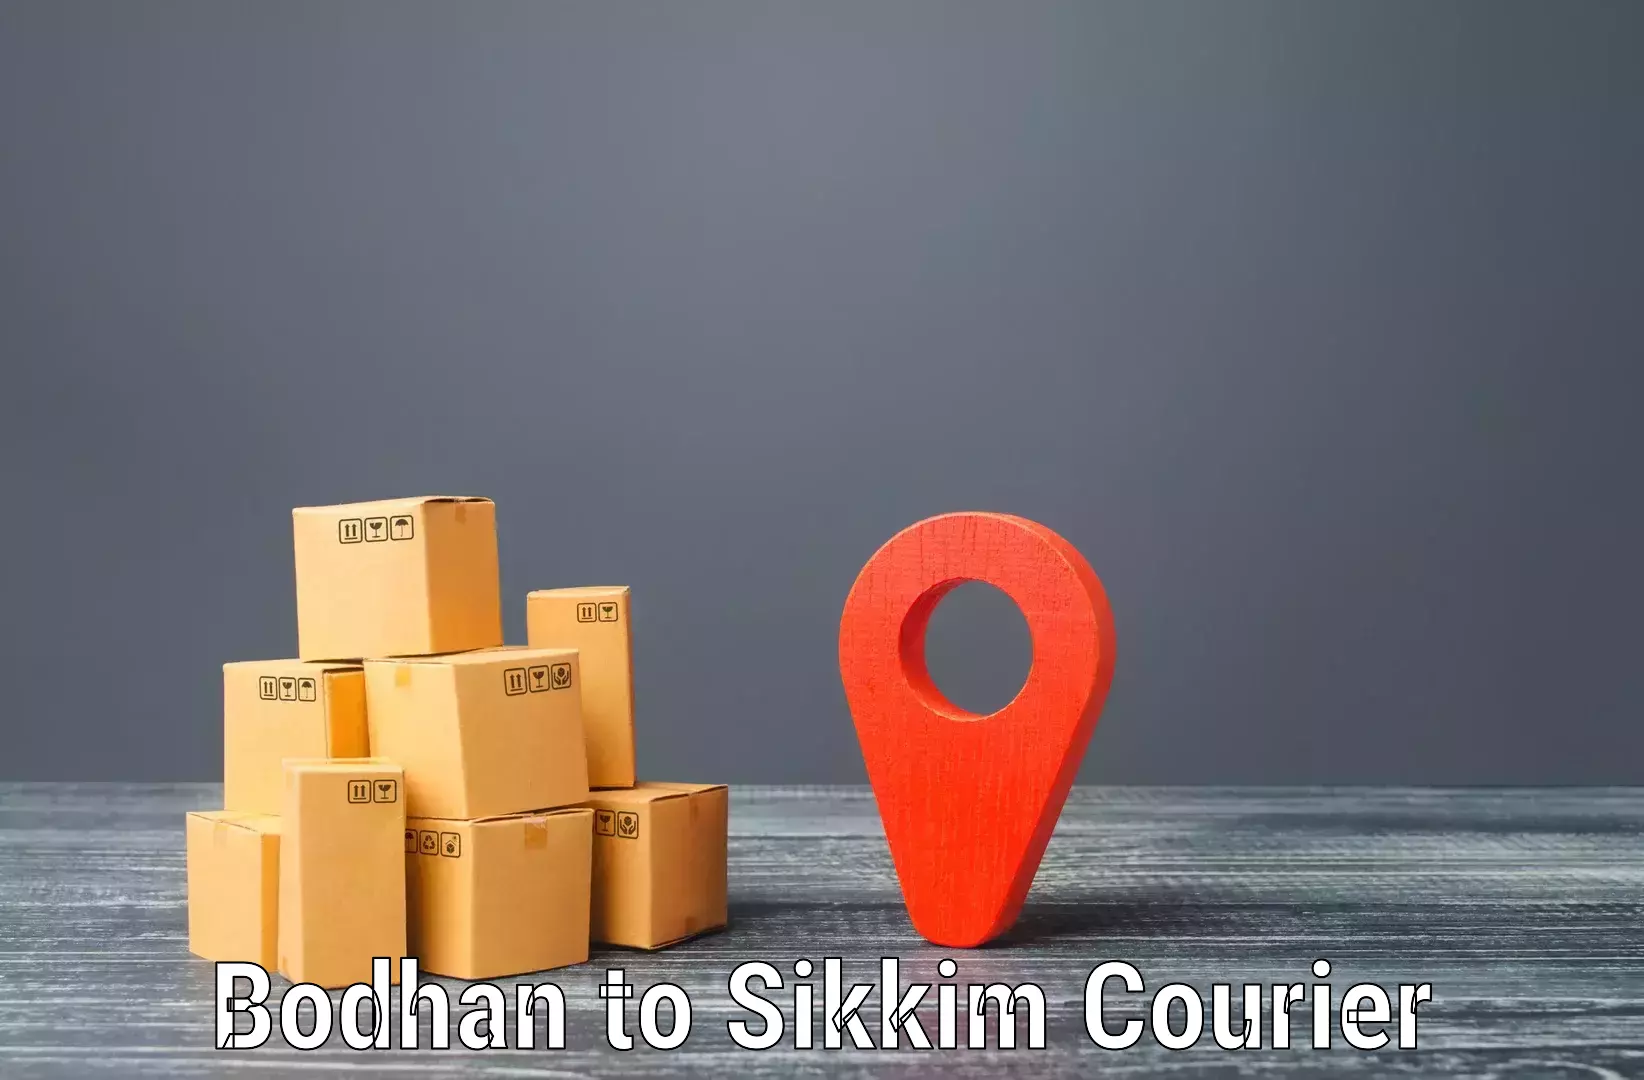 High-efficiency logistics in Bodhan to East Sikkim